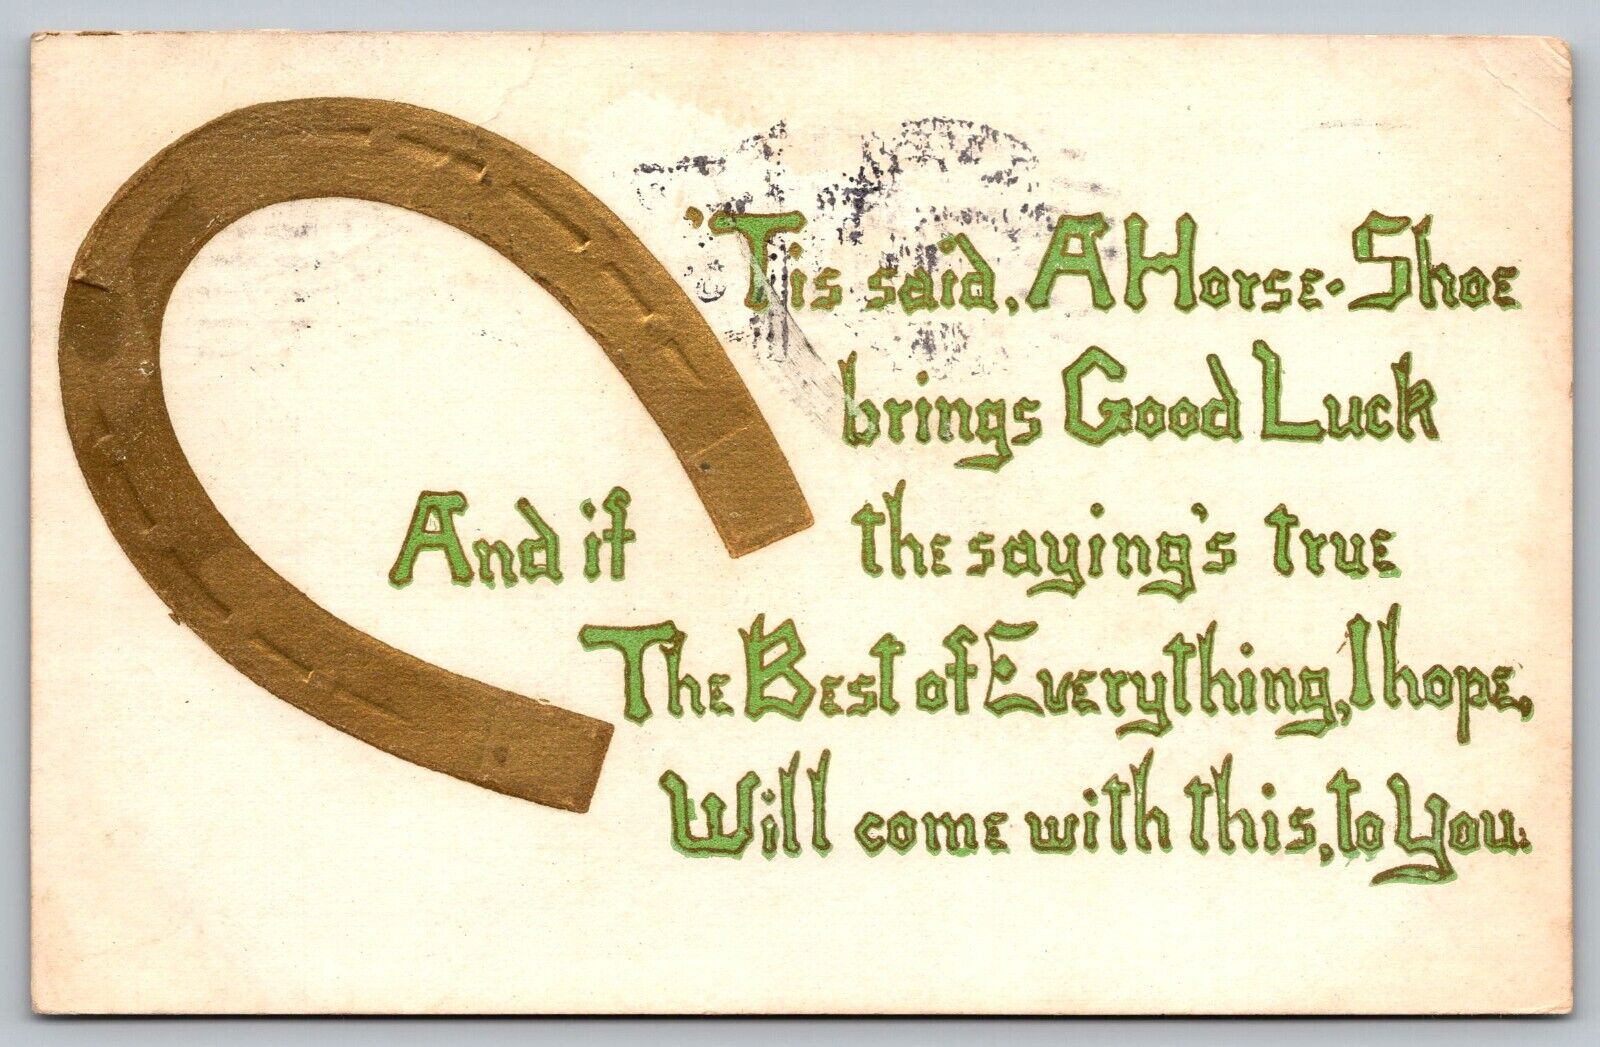 Postcard Greetings Poem About A Horse Shoe Brings Good Luck VTG c1909  I4